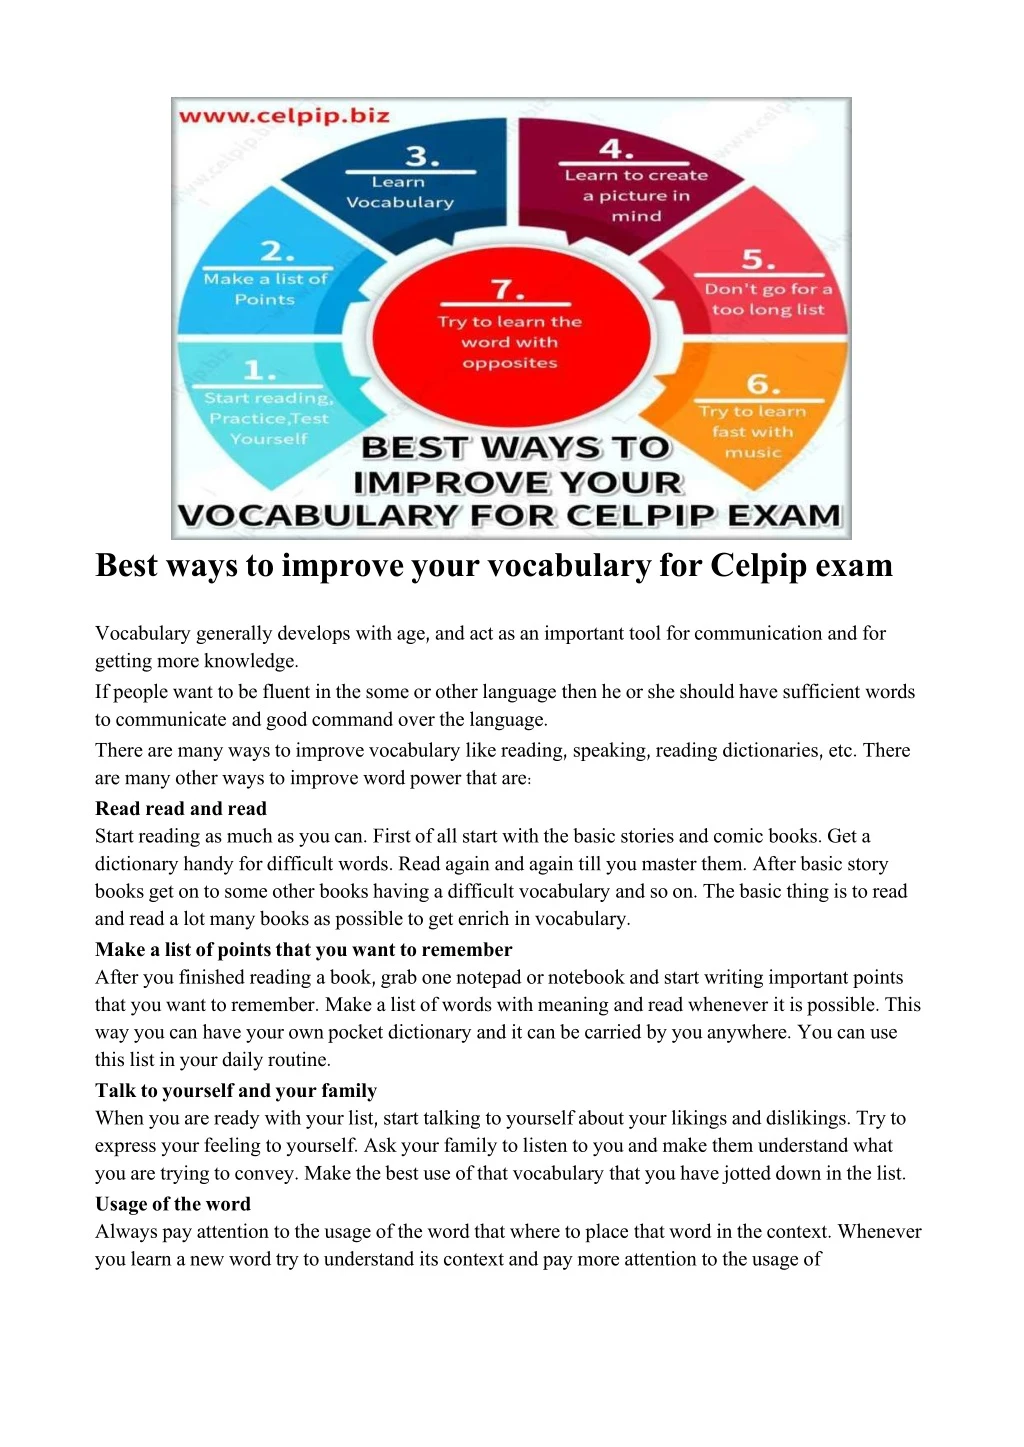 best ways to improve your vocabulary for celpip